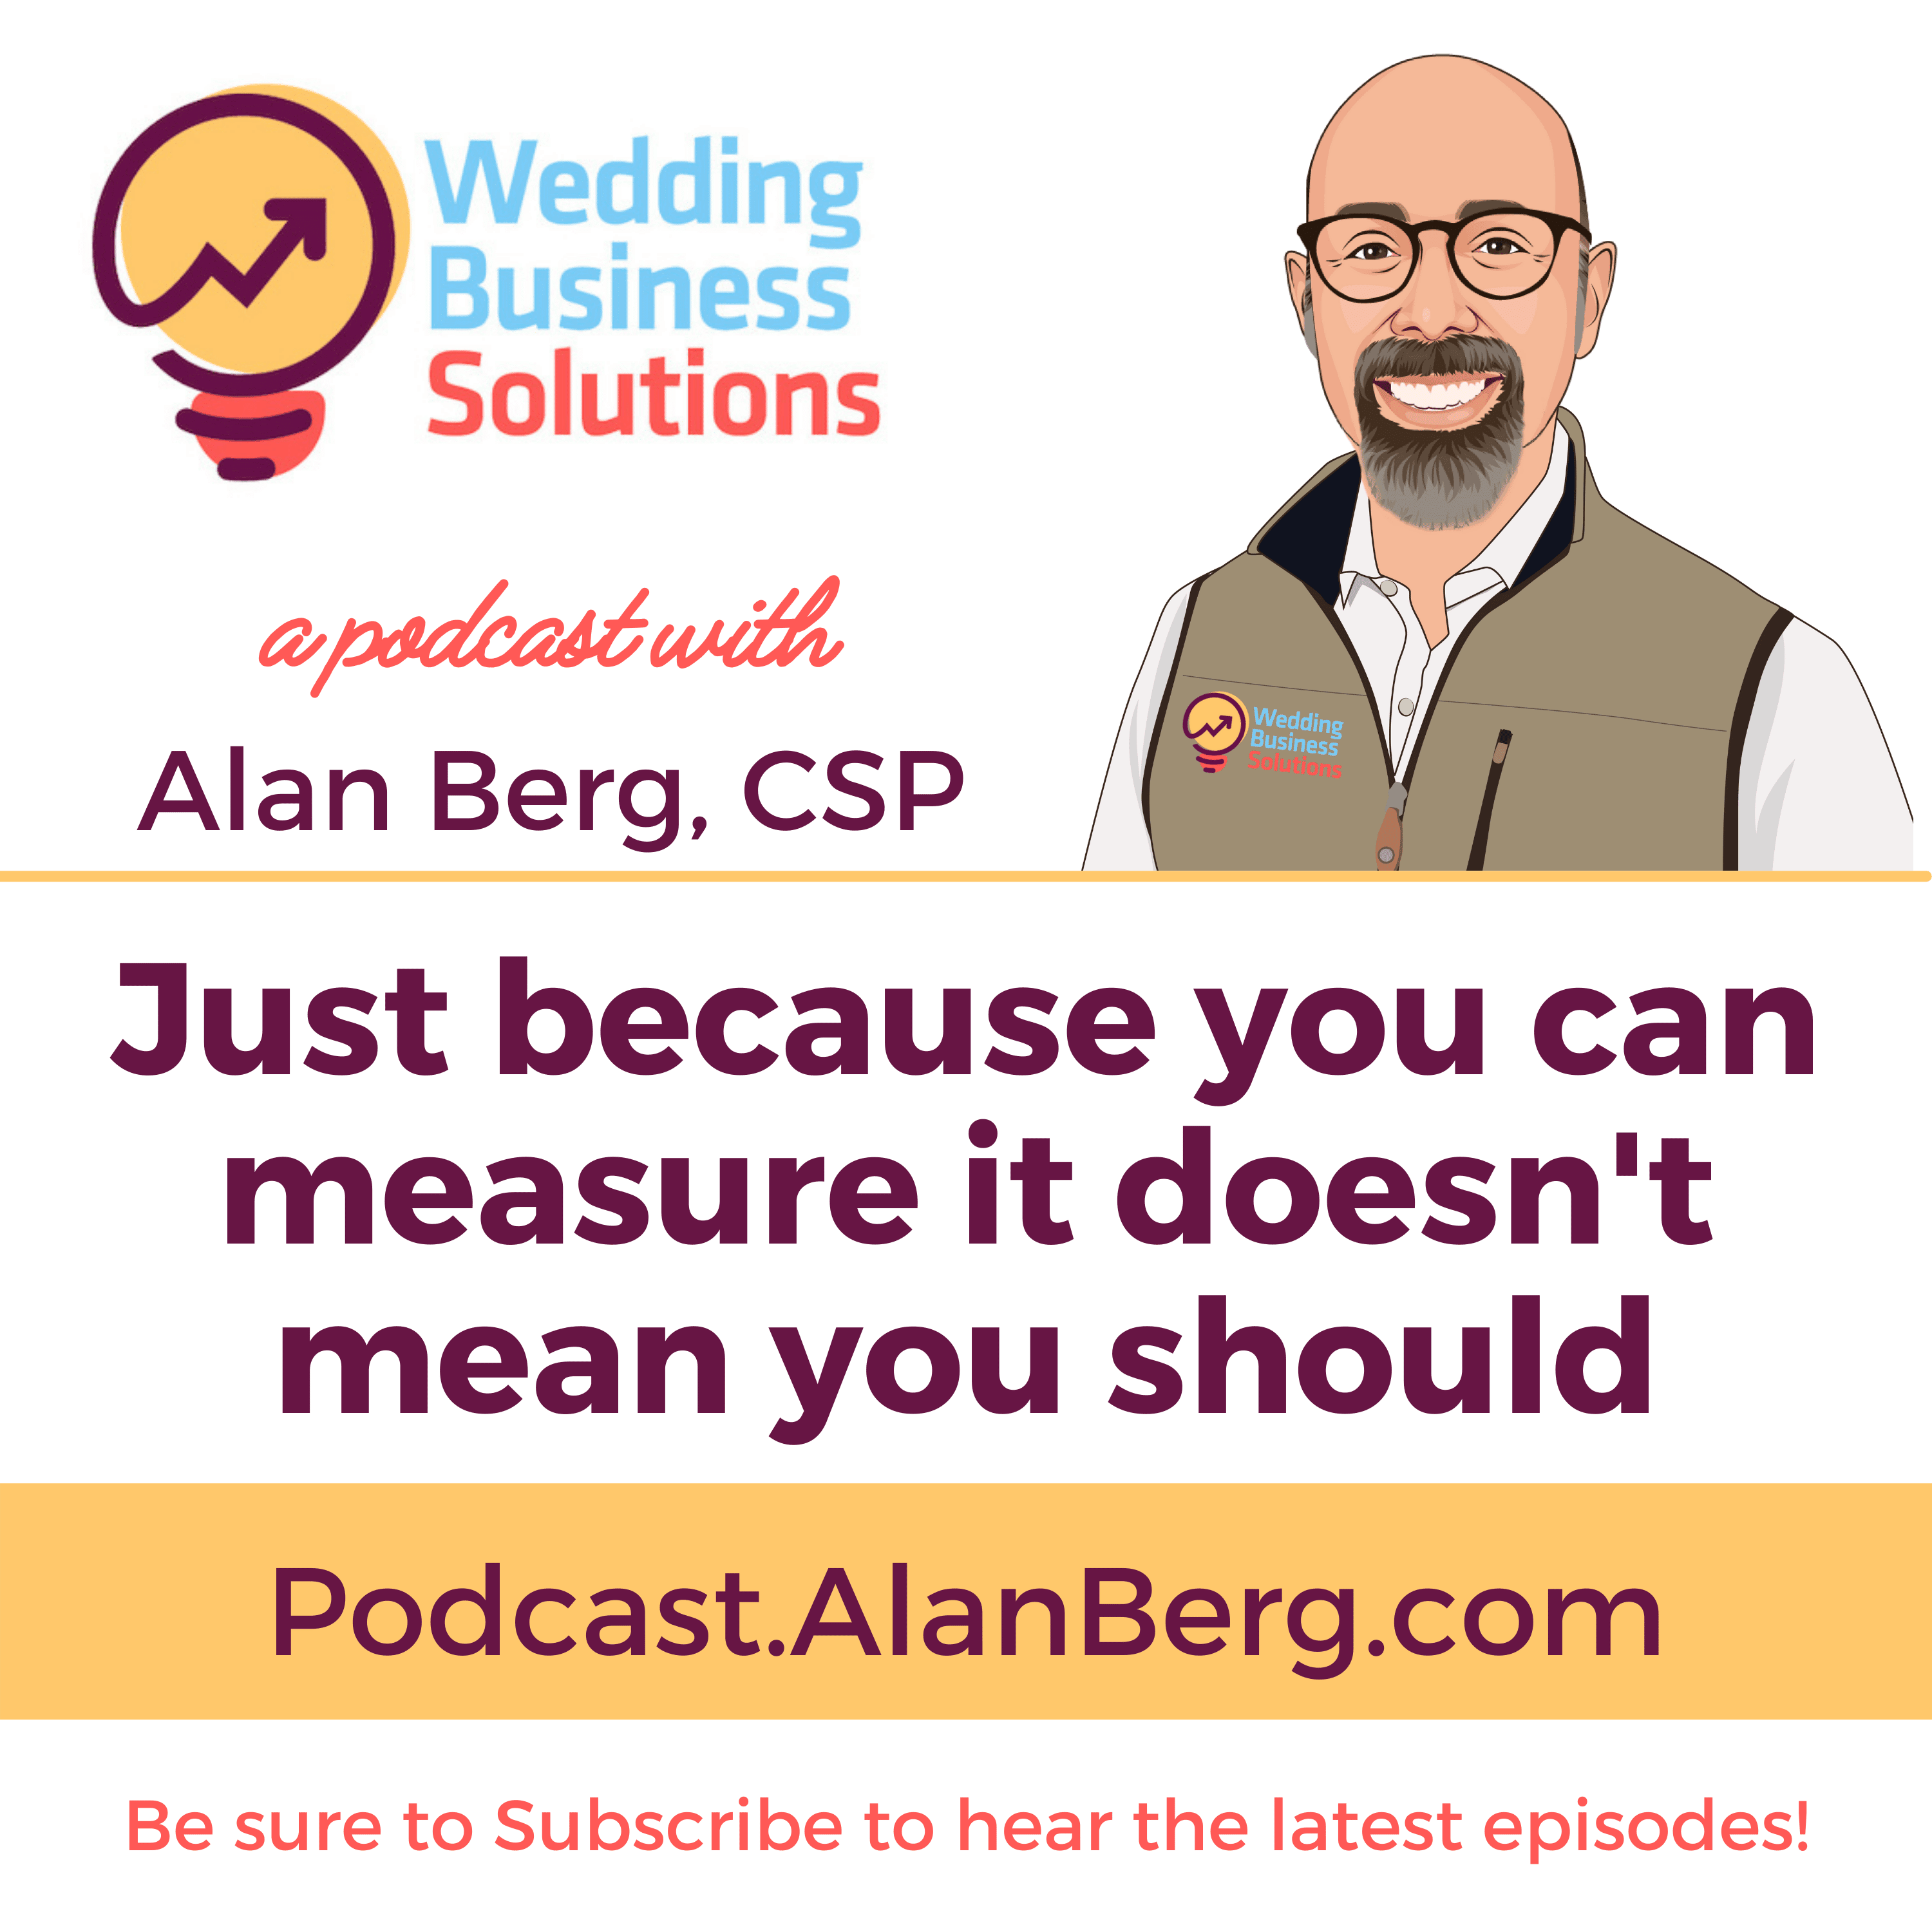 Just because you can measure it doesn't mean you should - Wedding Business Solutions Podcast with Alan Berg CSP